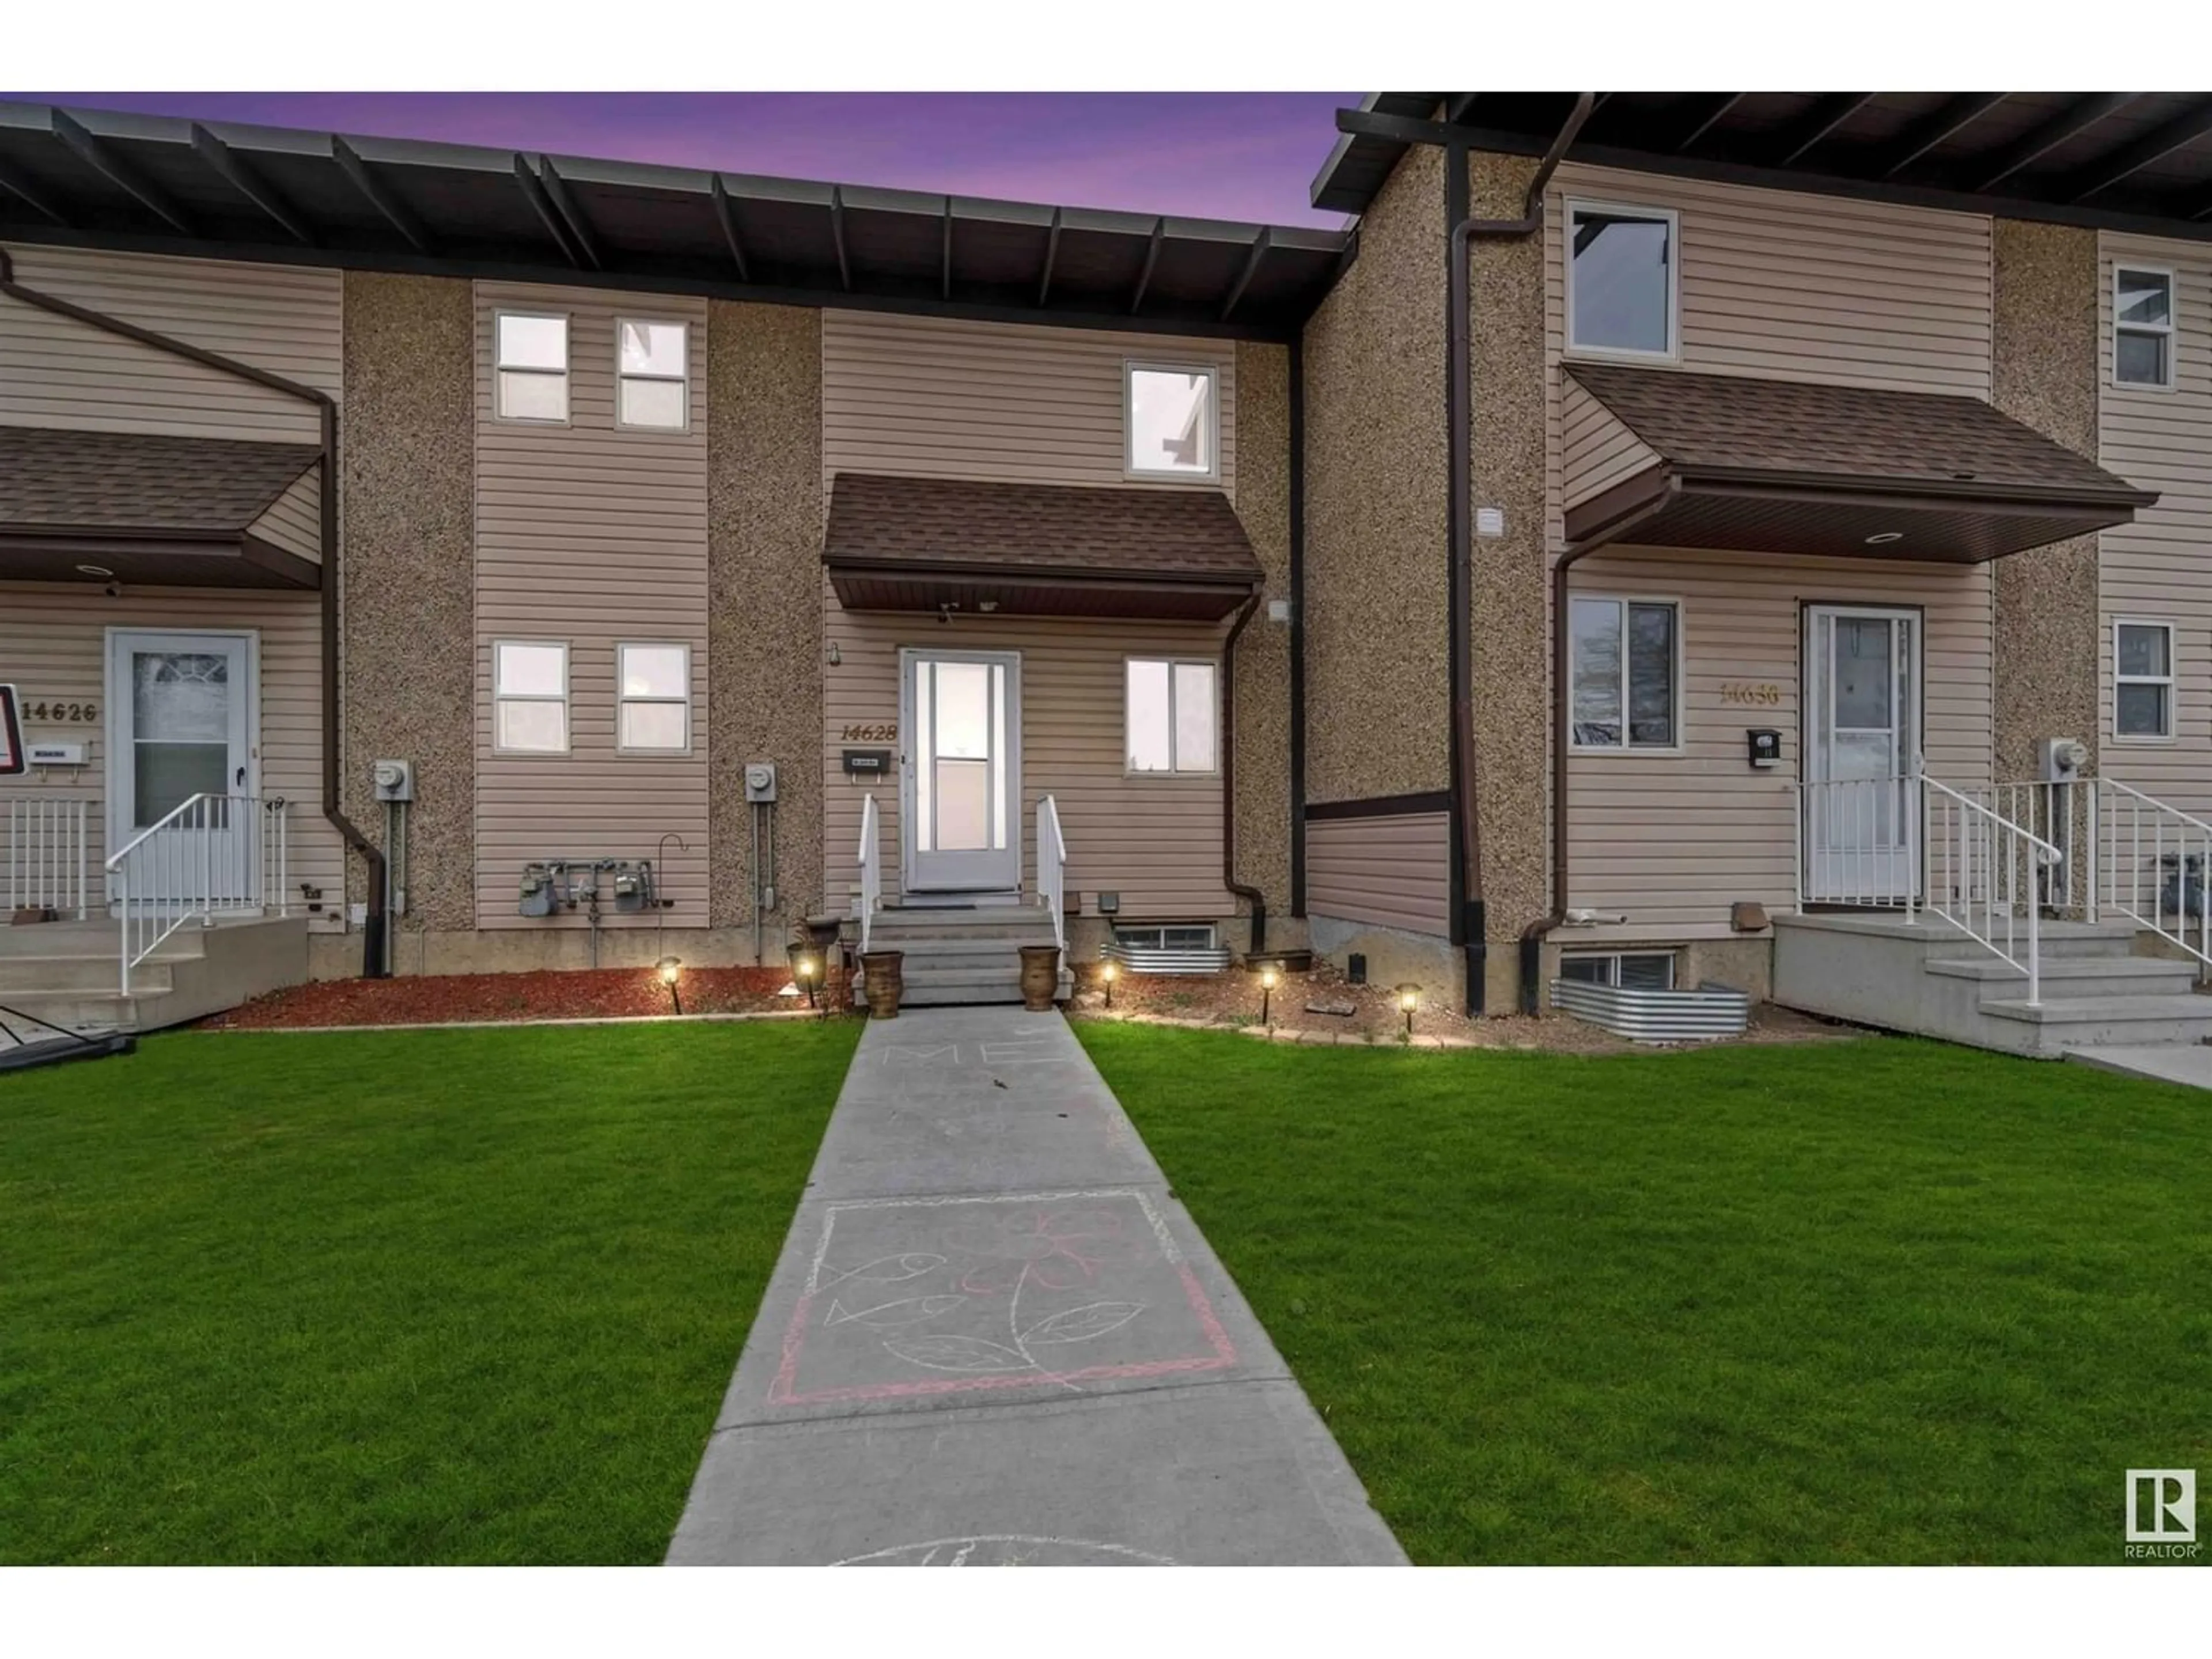 A pic from exterior of the house or condo for 14628 121 ST NW, Edmonton Alberta T5X1T8